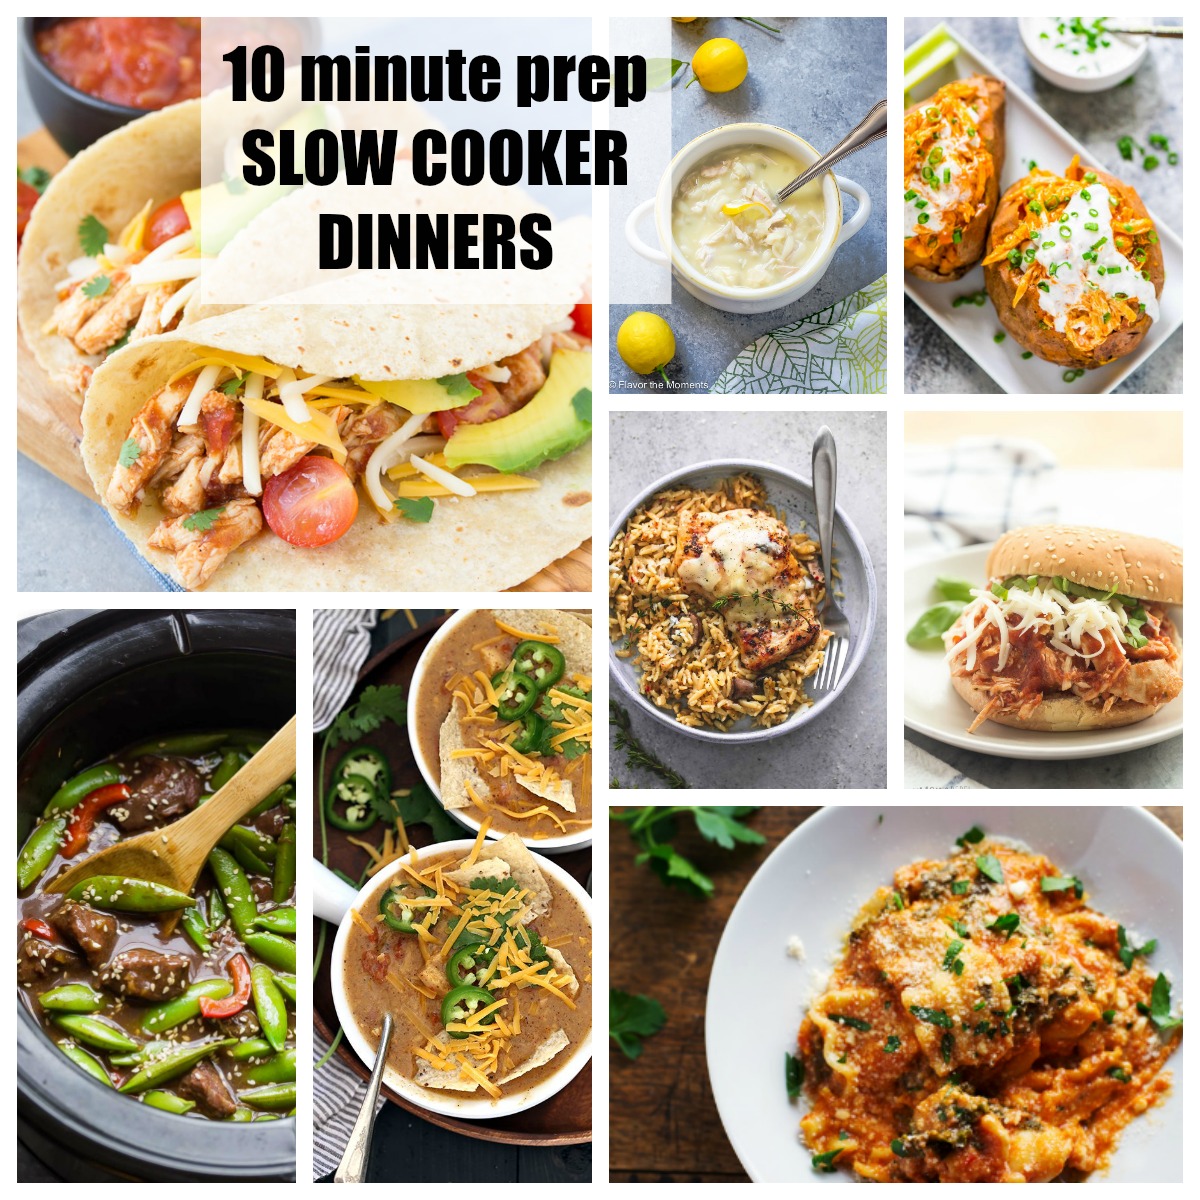 10 Minute Prep Slow Cooker Dinners